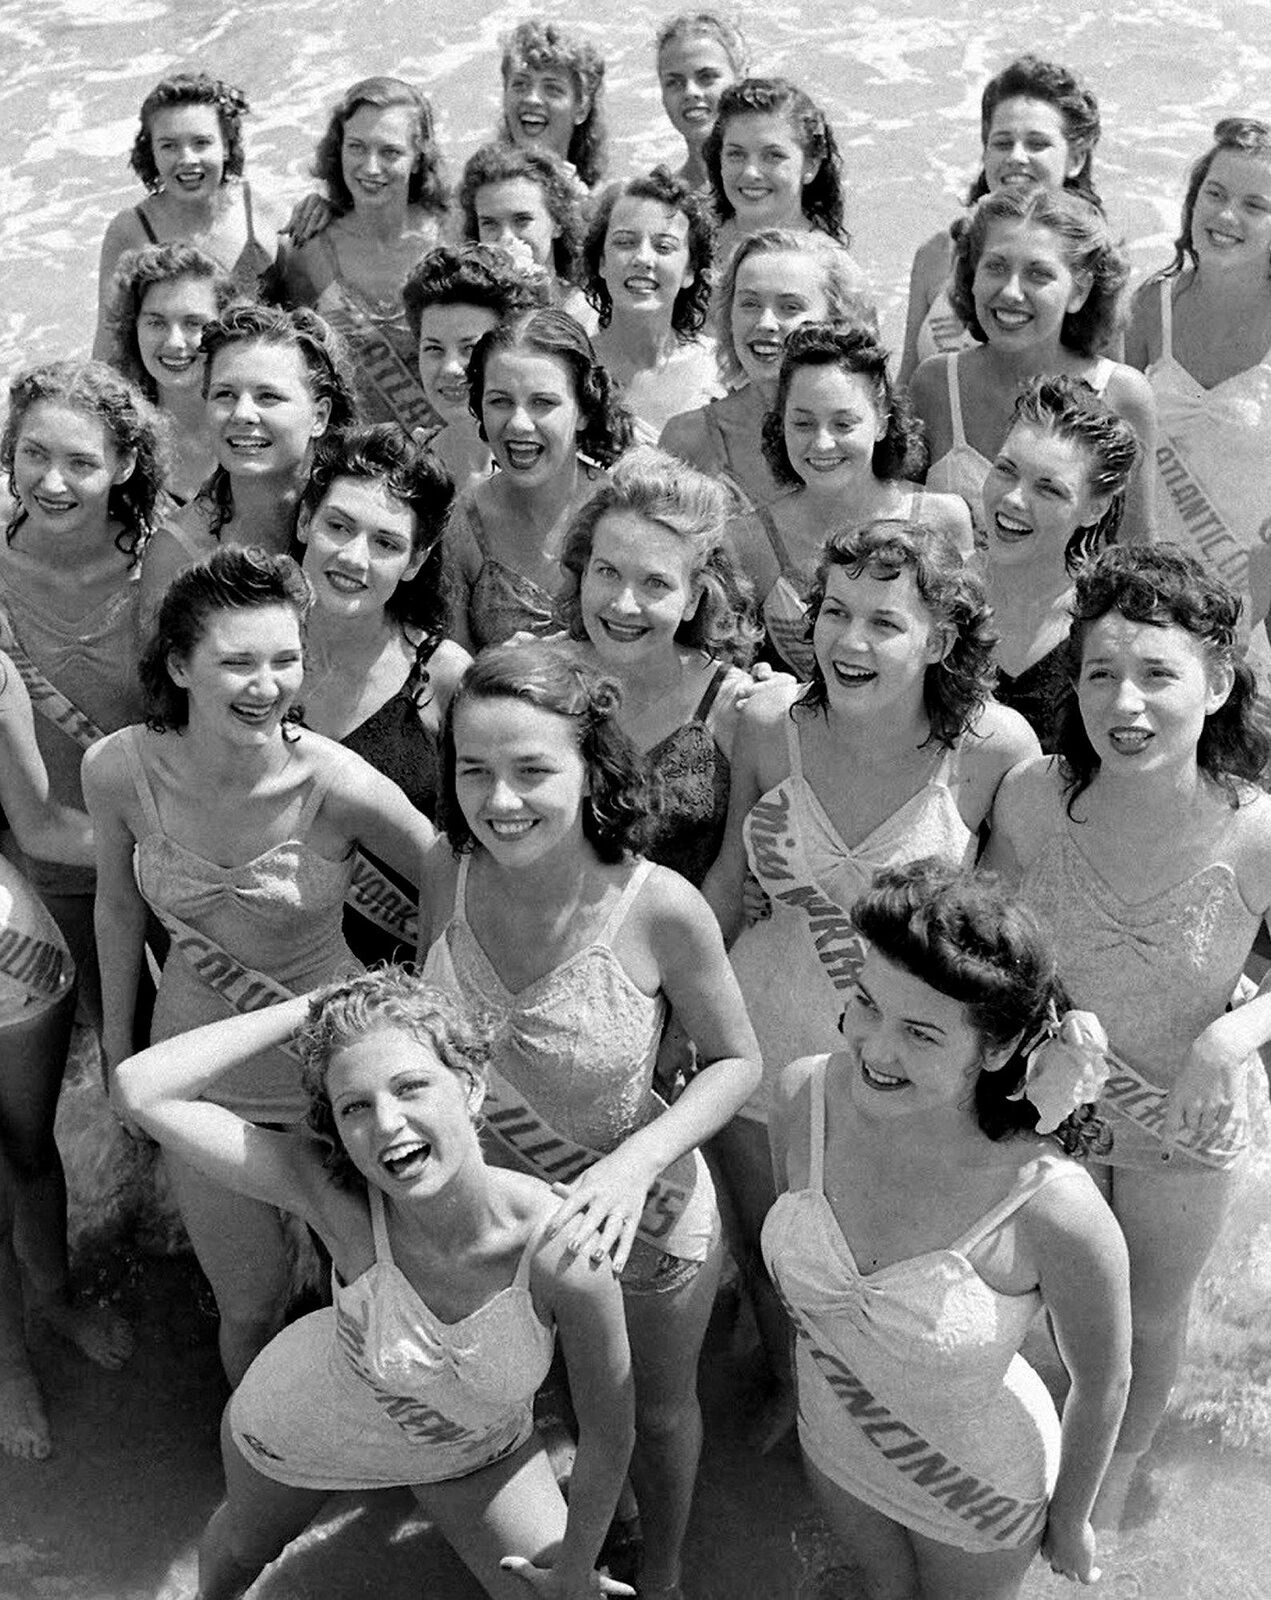 1944 MISS AMERICA PAGEANT CONTESTANTS in Atlantic City PHOTO  (201-H)